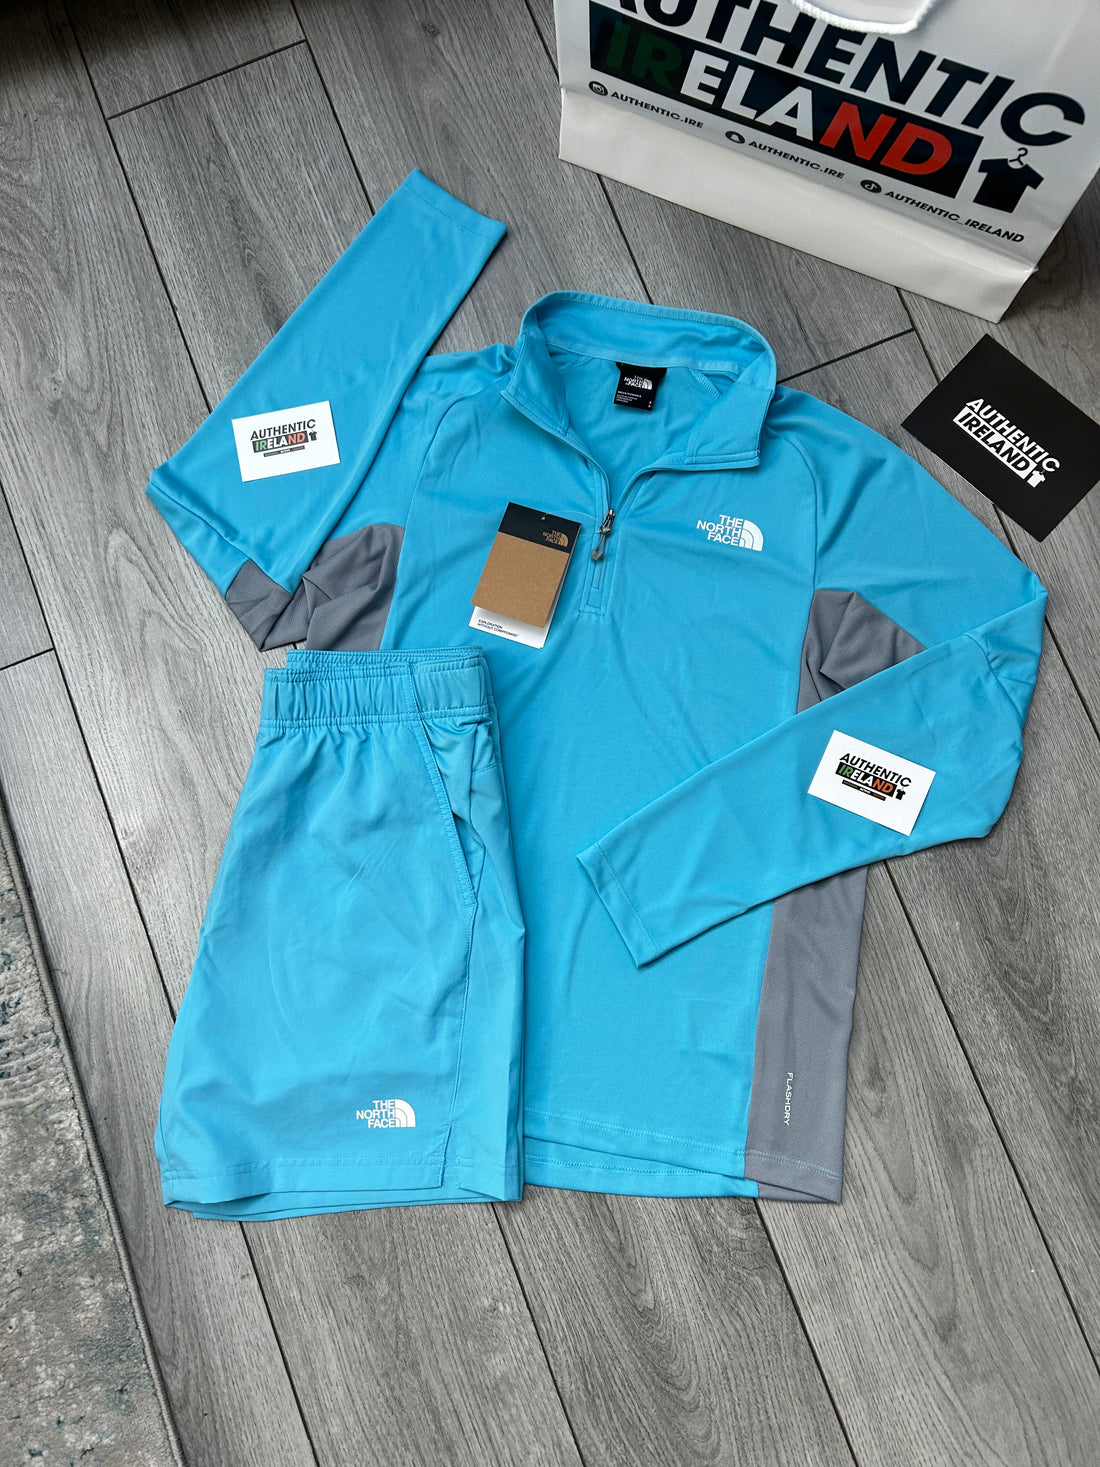 THE NORTH FACE 1/4 ZIP SET - BABY BLUE/GREY